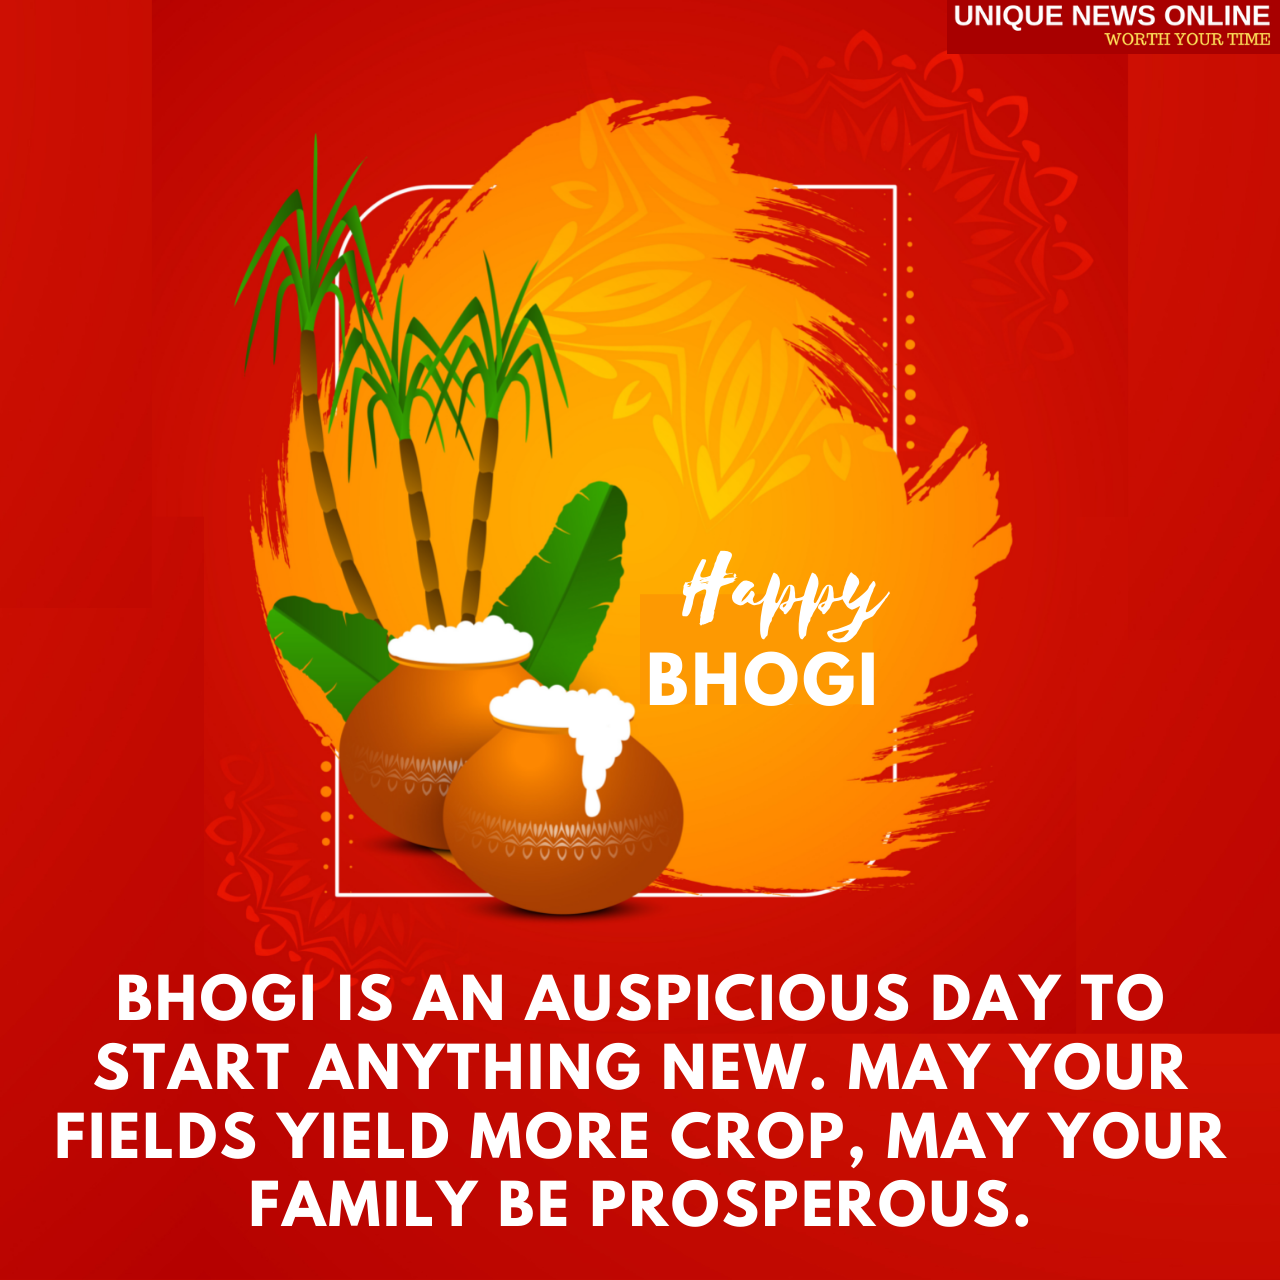 Happy Bhogi 2022 Wishes, HD Images, Quotes, Messages, Greetings, and WhatsApp Status Video to greet your loved ones